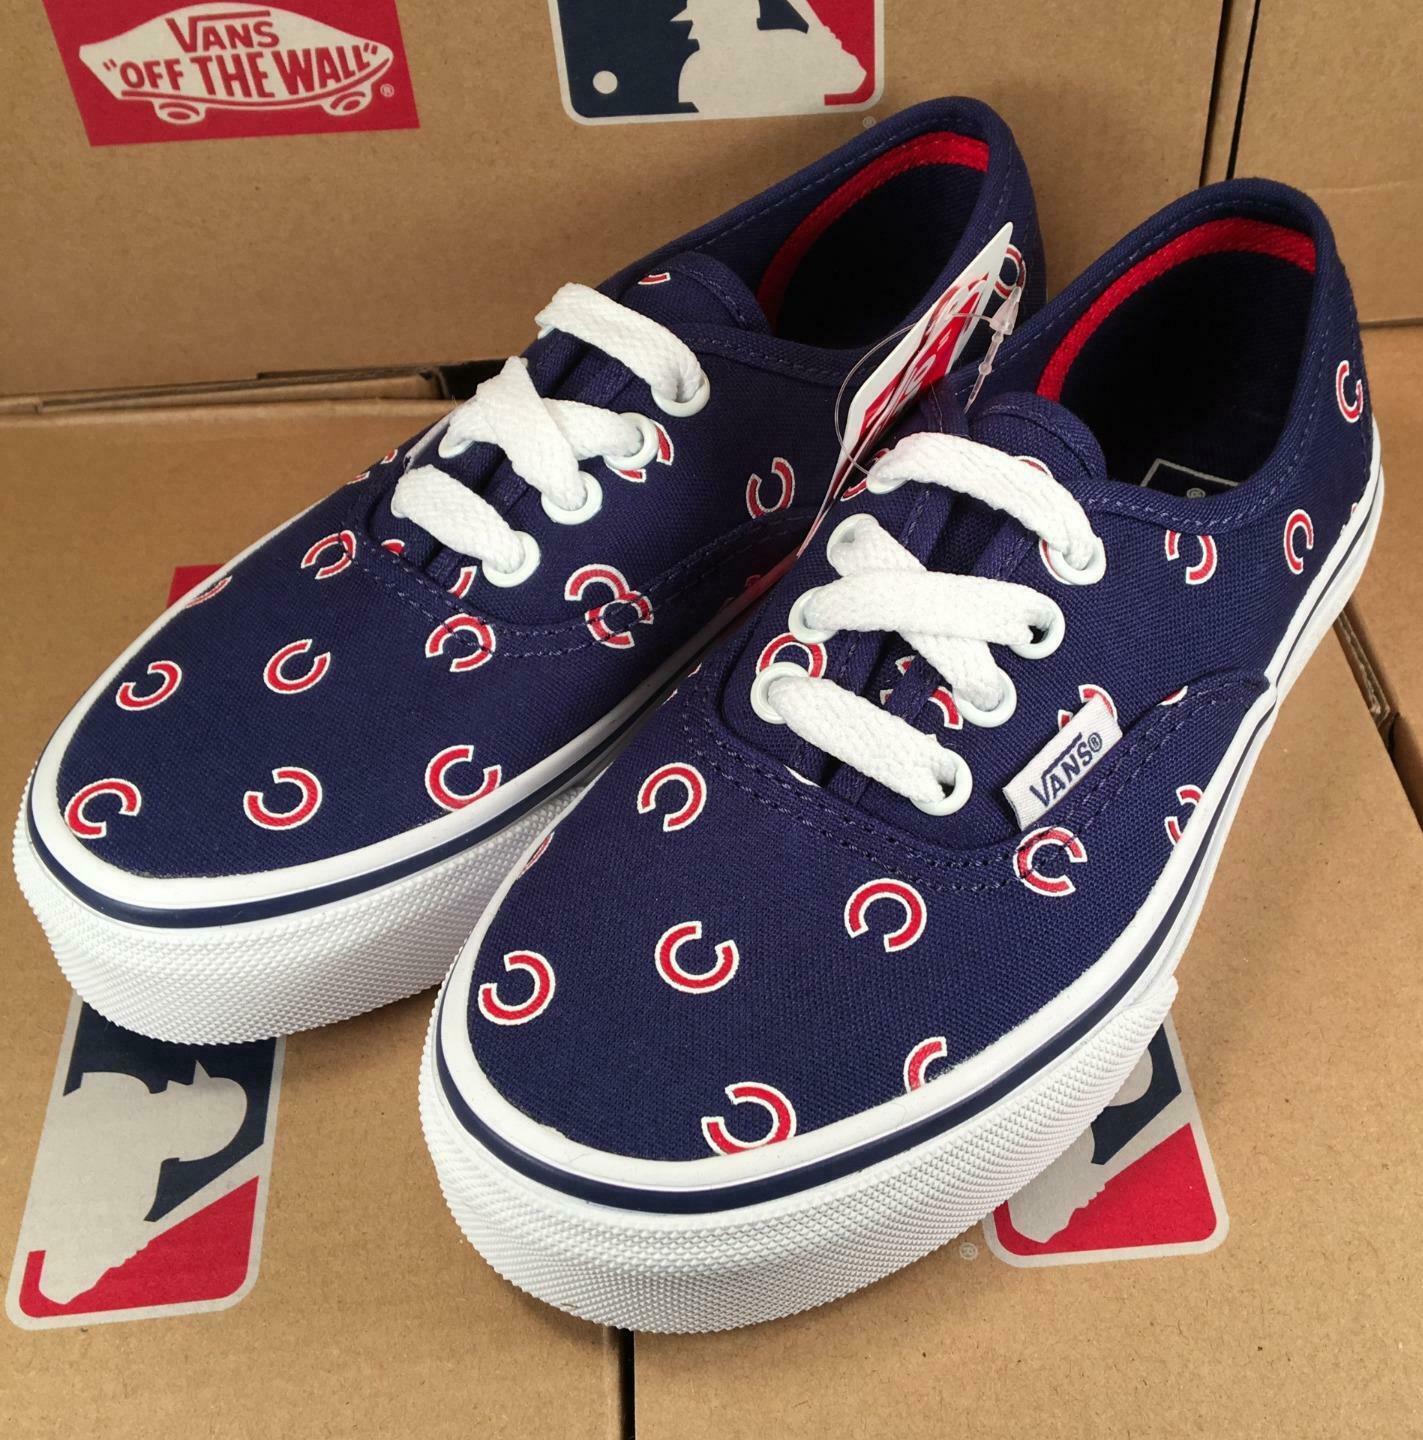 Vans KIDS Chicago Cubs MLB Authentic Sneaker Limited Edition Shoes Kids ...